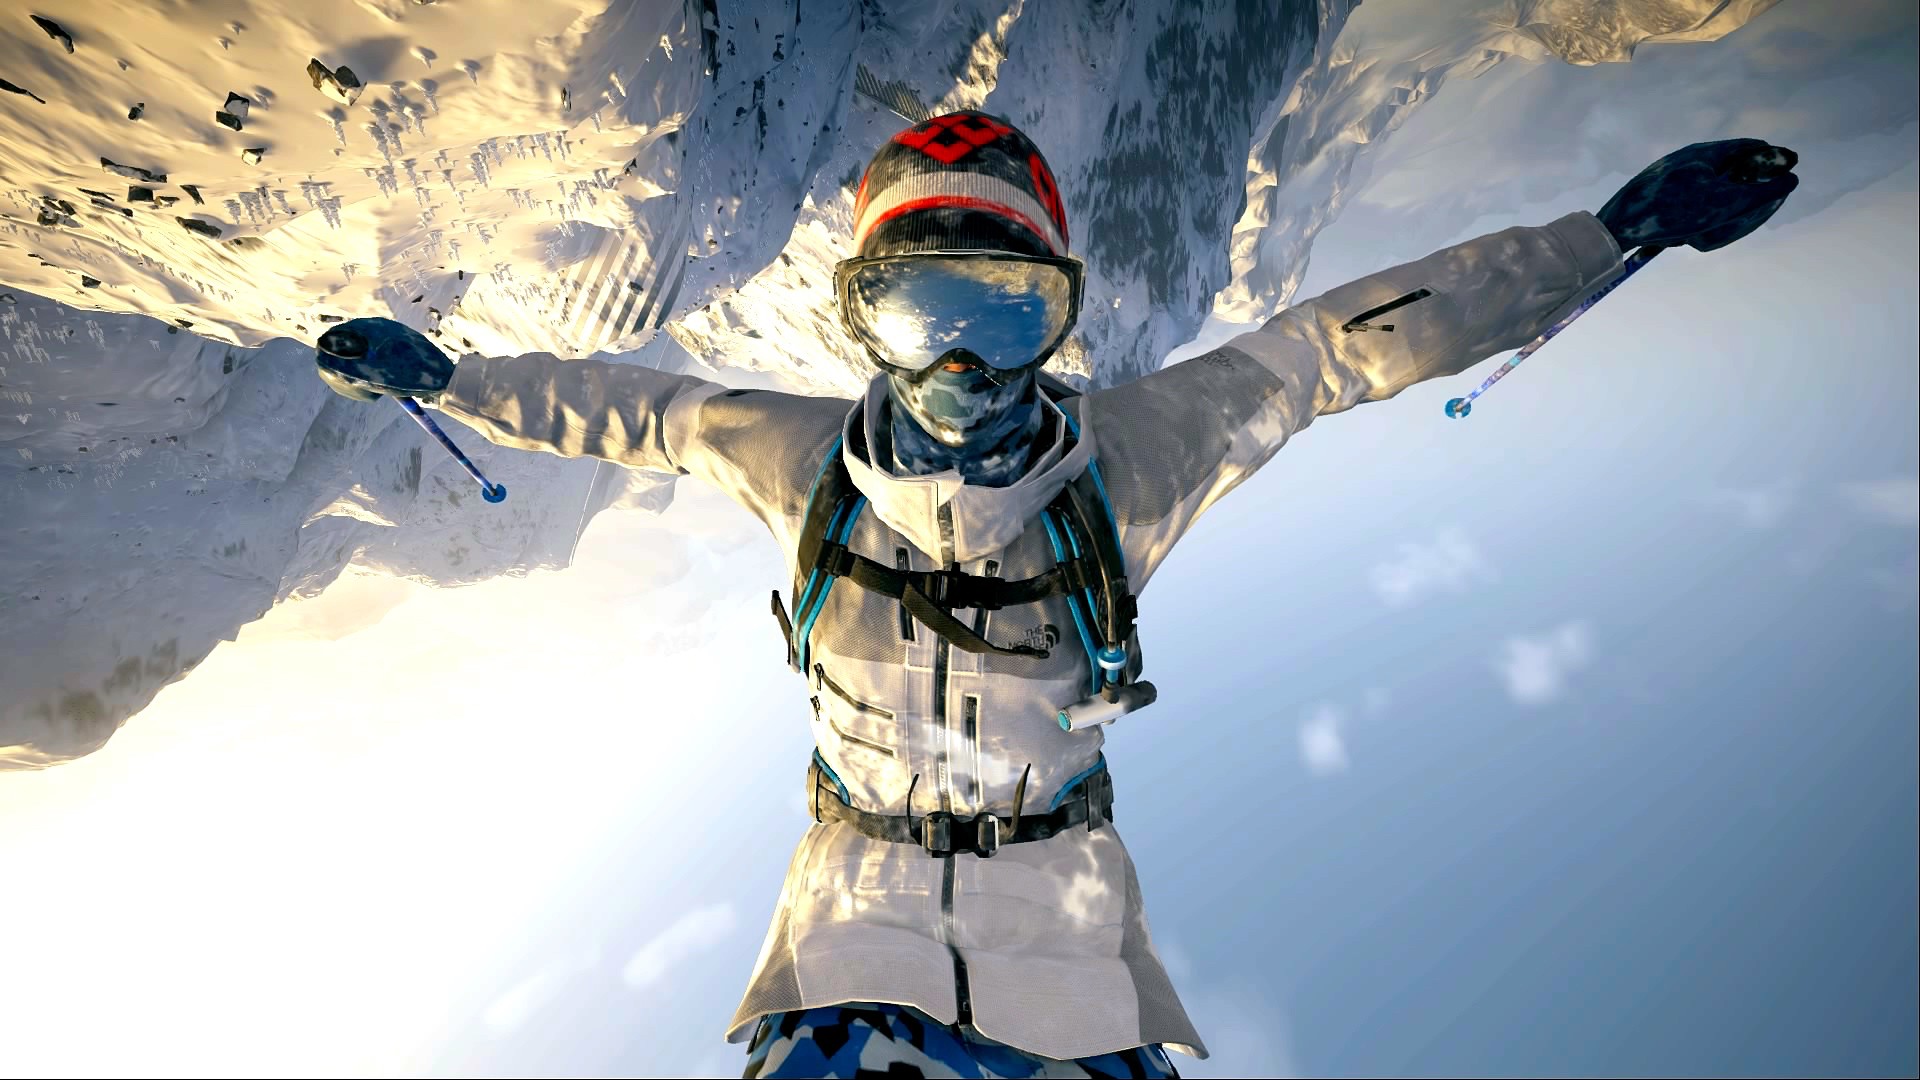 General 1920x1080 Steep PlayStation 4 backflip snow upside down goggles video games mountains